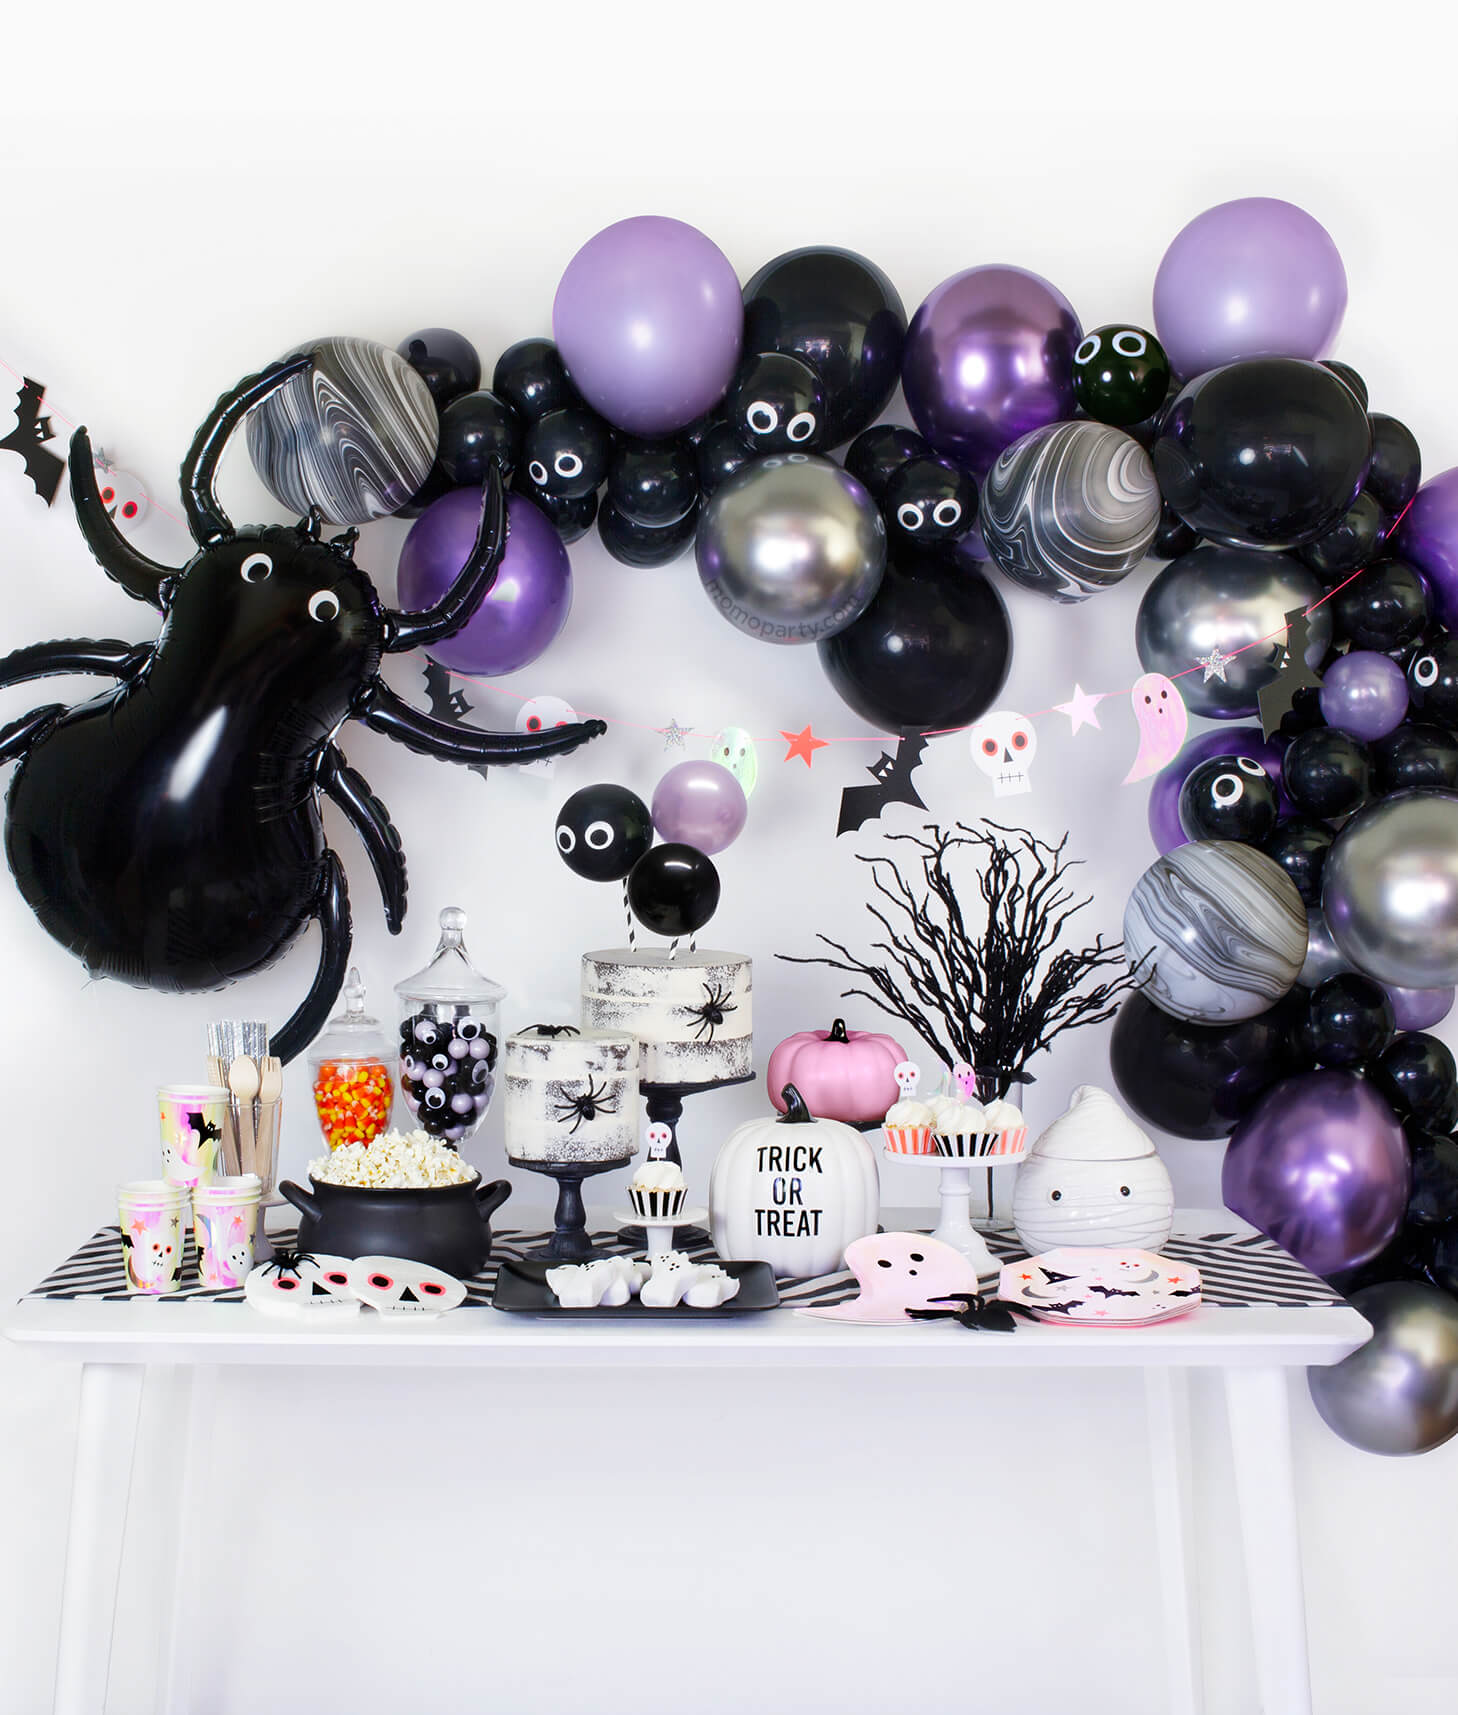  Momo Party 2019 New Halloween party collection table set up and black, purple chrome and silver color balloon garland and black spider foil balloon decoration 